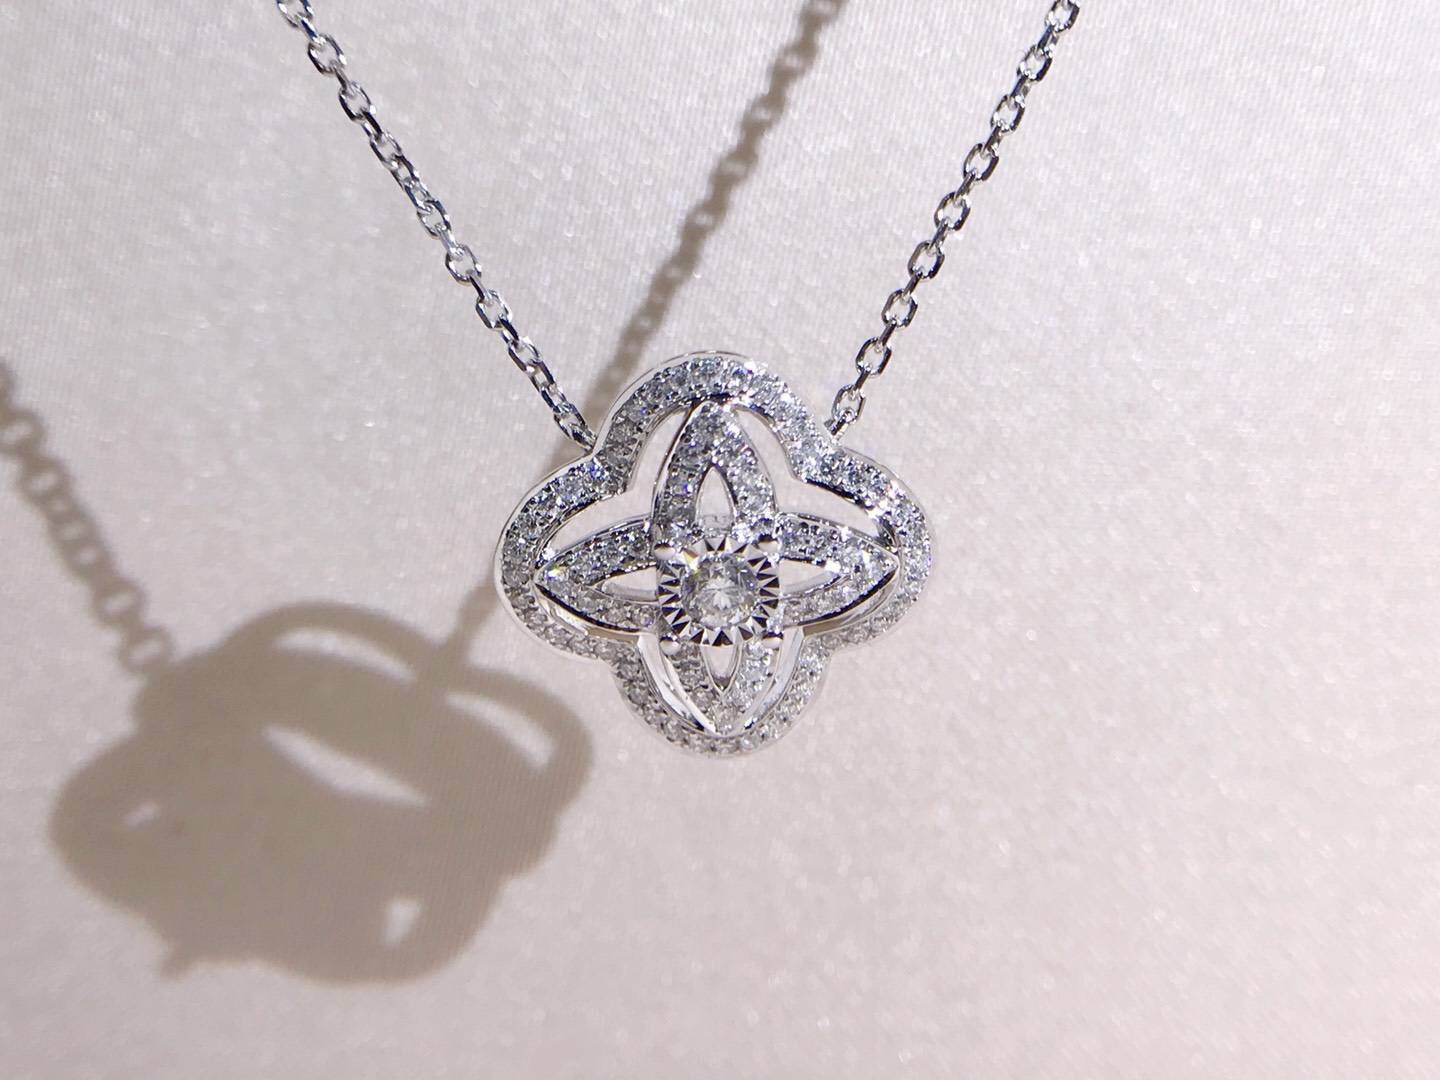 P00833 Flower Shaped Diamond Necklace in 18k White Gold